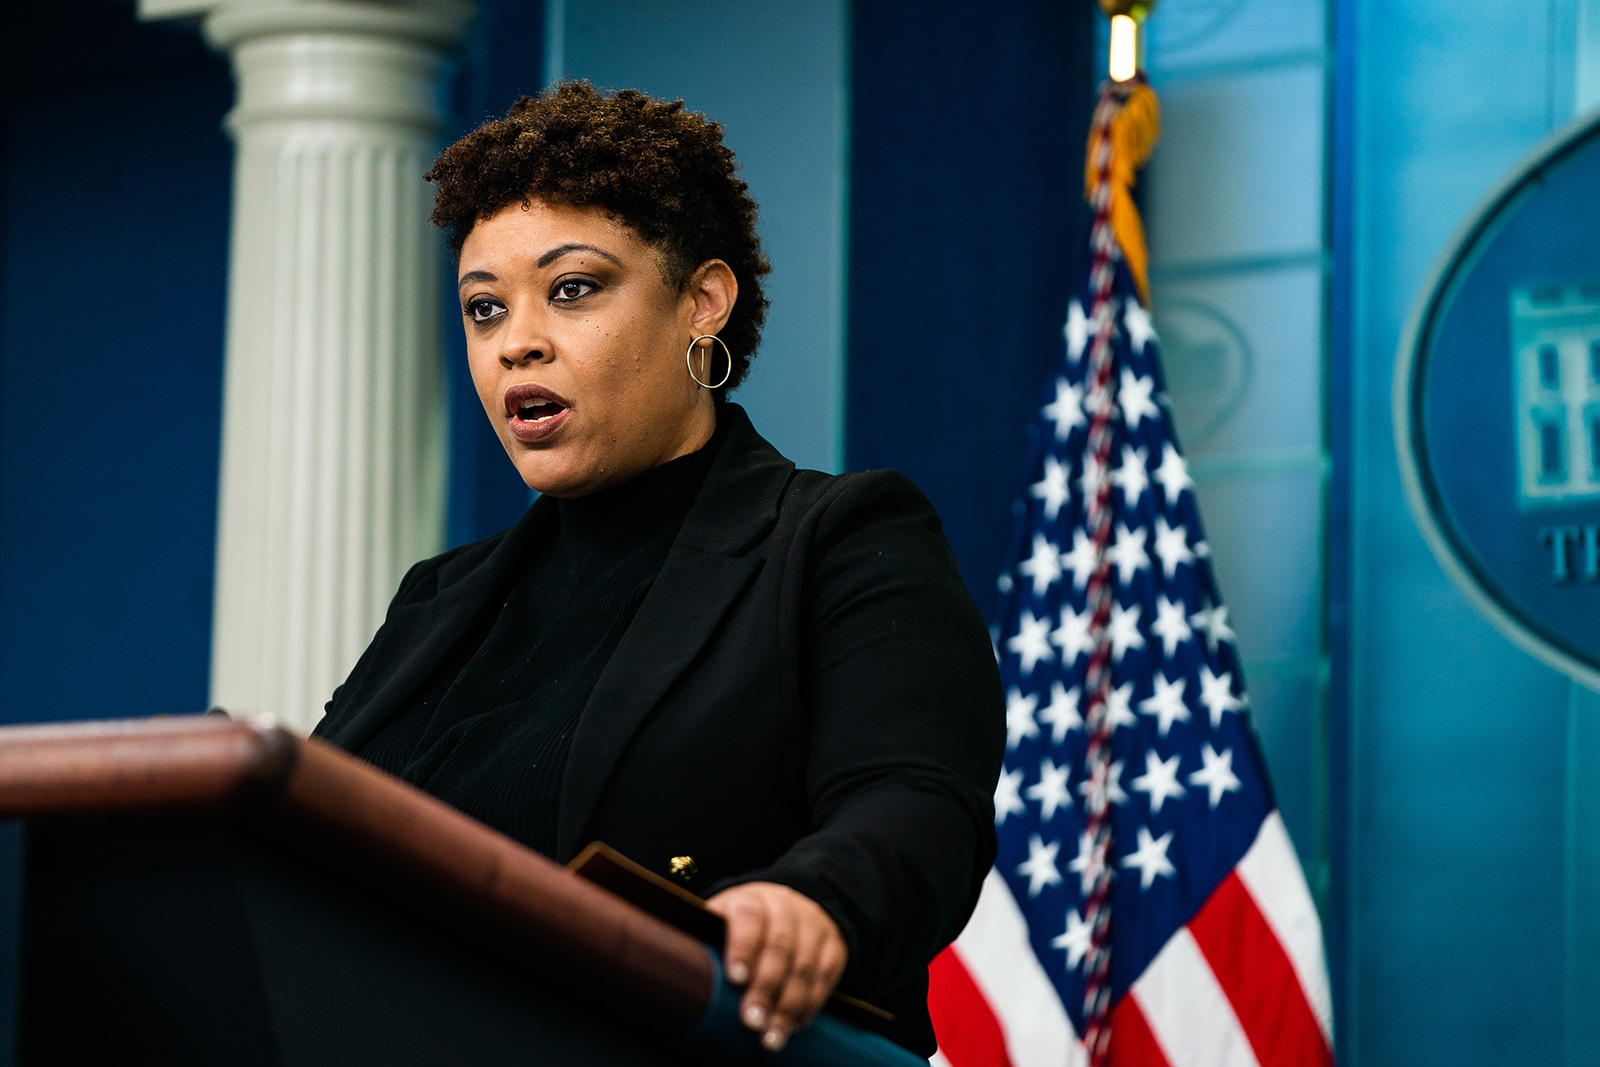 Office of Management and Budget Director Shalanda Young speak at the White House in Washington DC, on May 4.